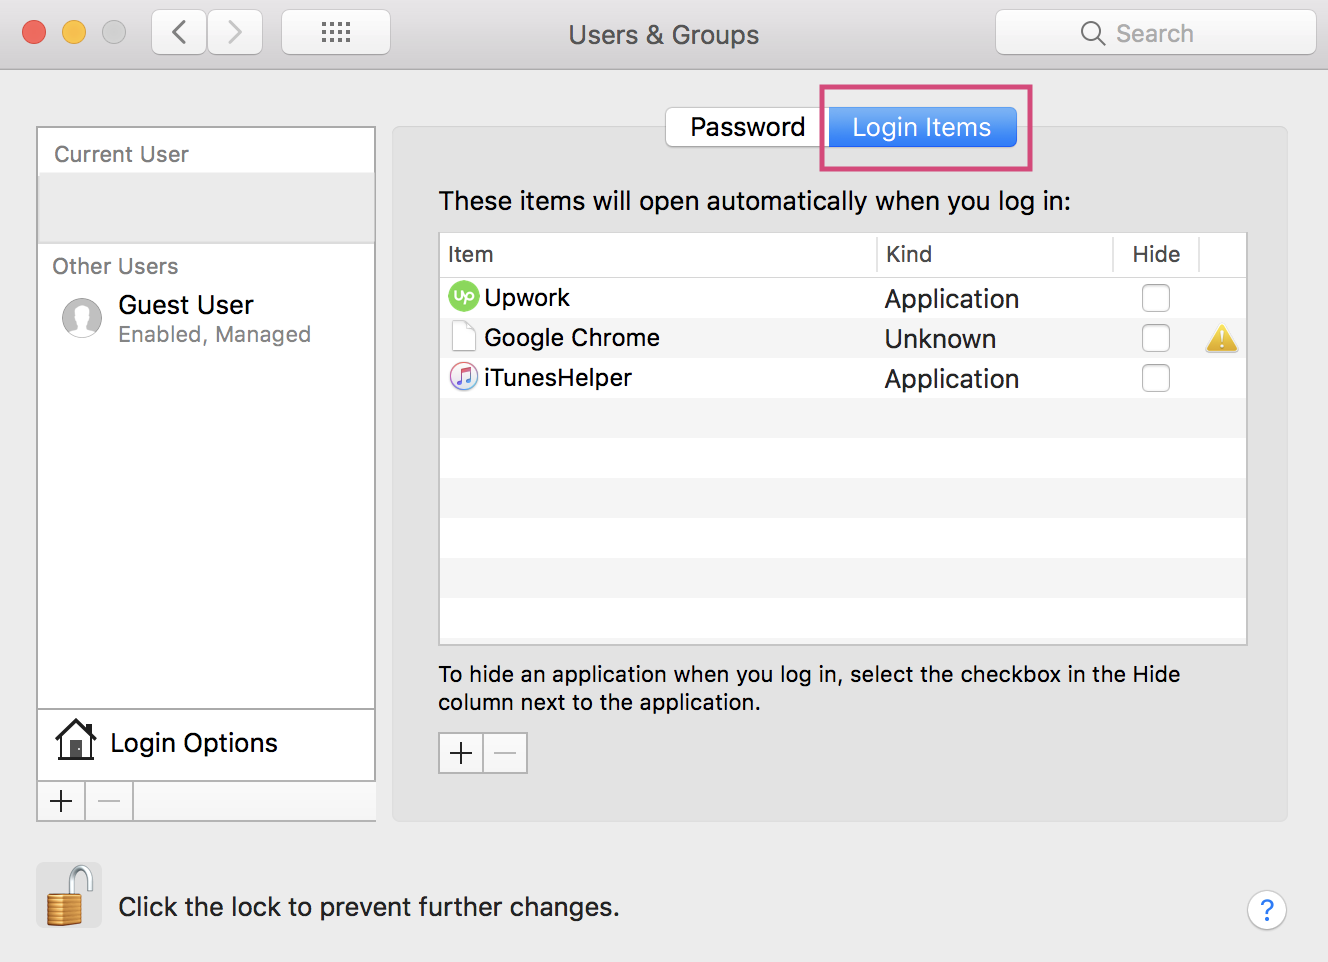 funter mac app cleaner popup on startup